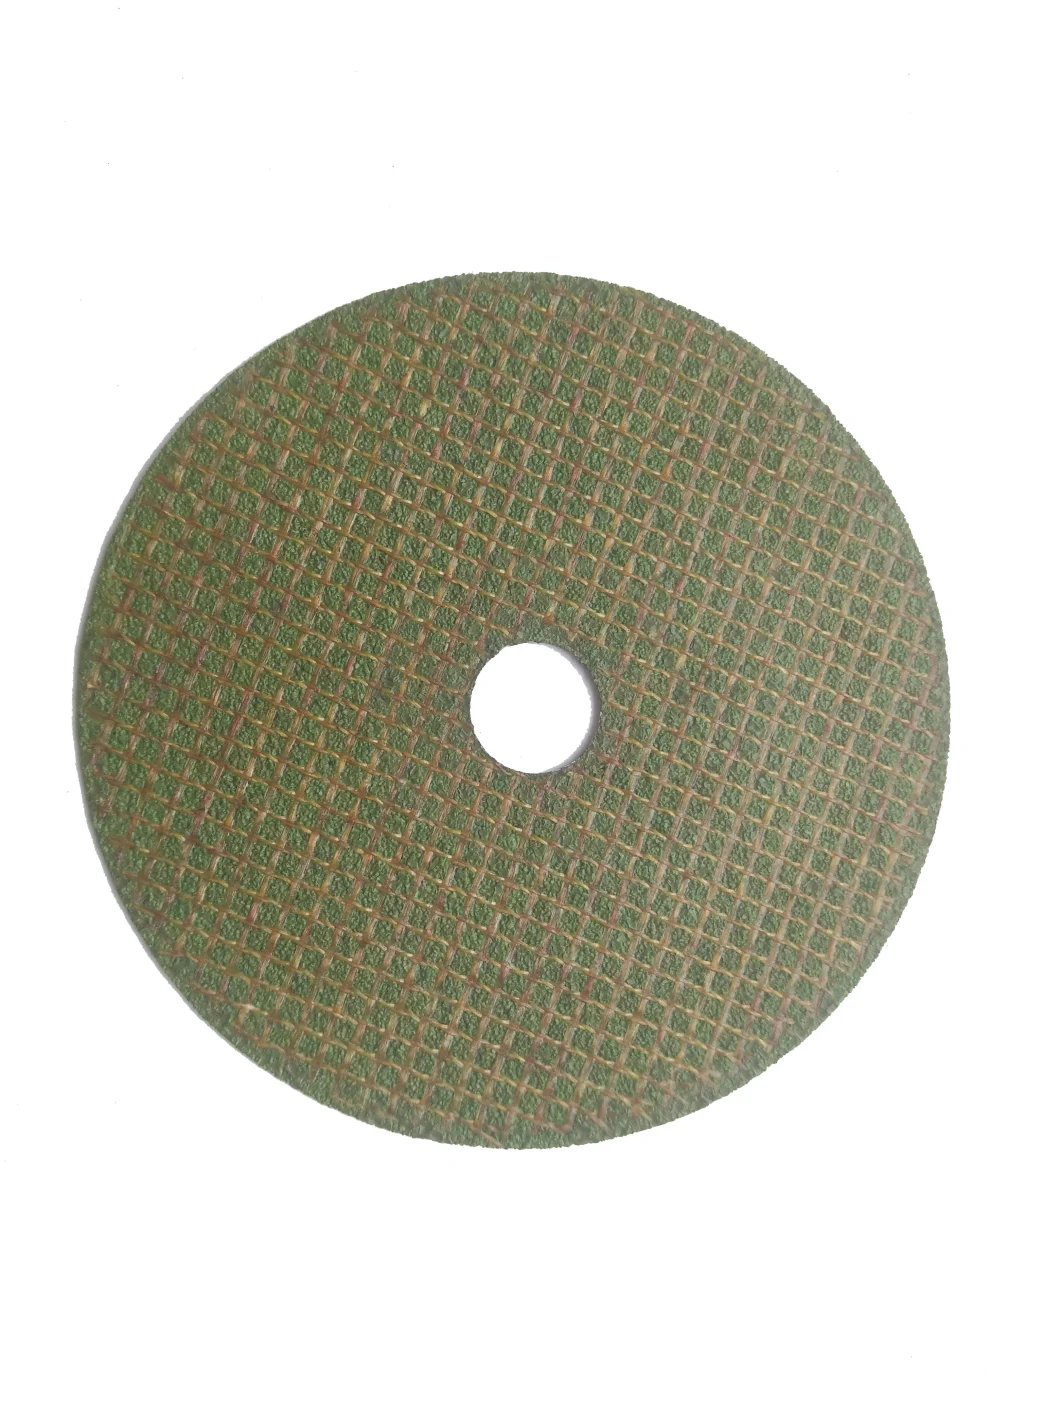 Cutting Grinding Disc Diamond Cutting Wheels for Stainless Steel Cut off Disc